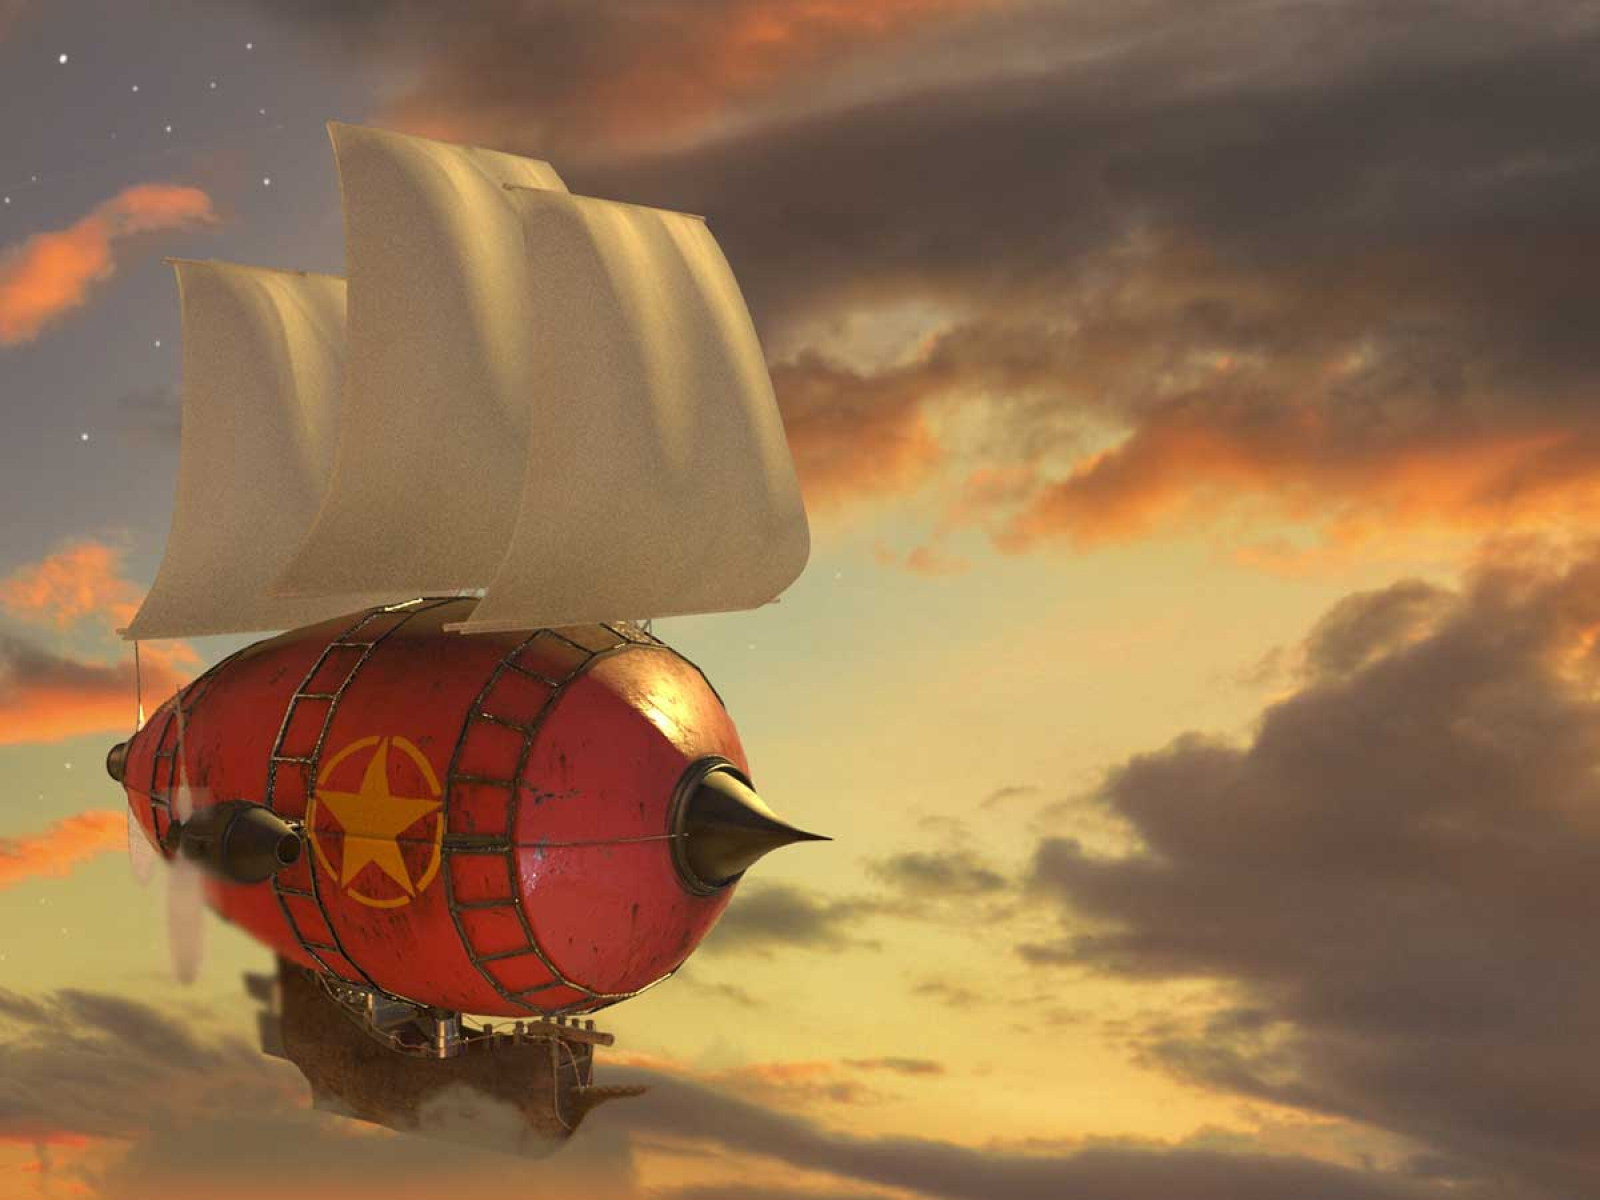 An airship flies through the sky as the clouds turn a golden color.